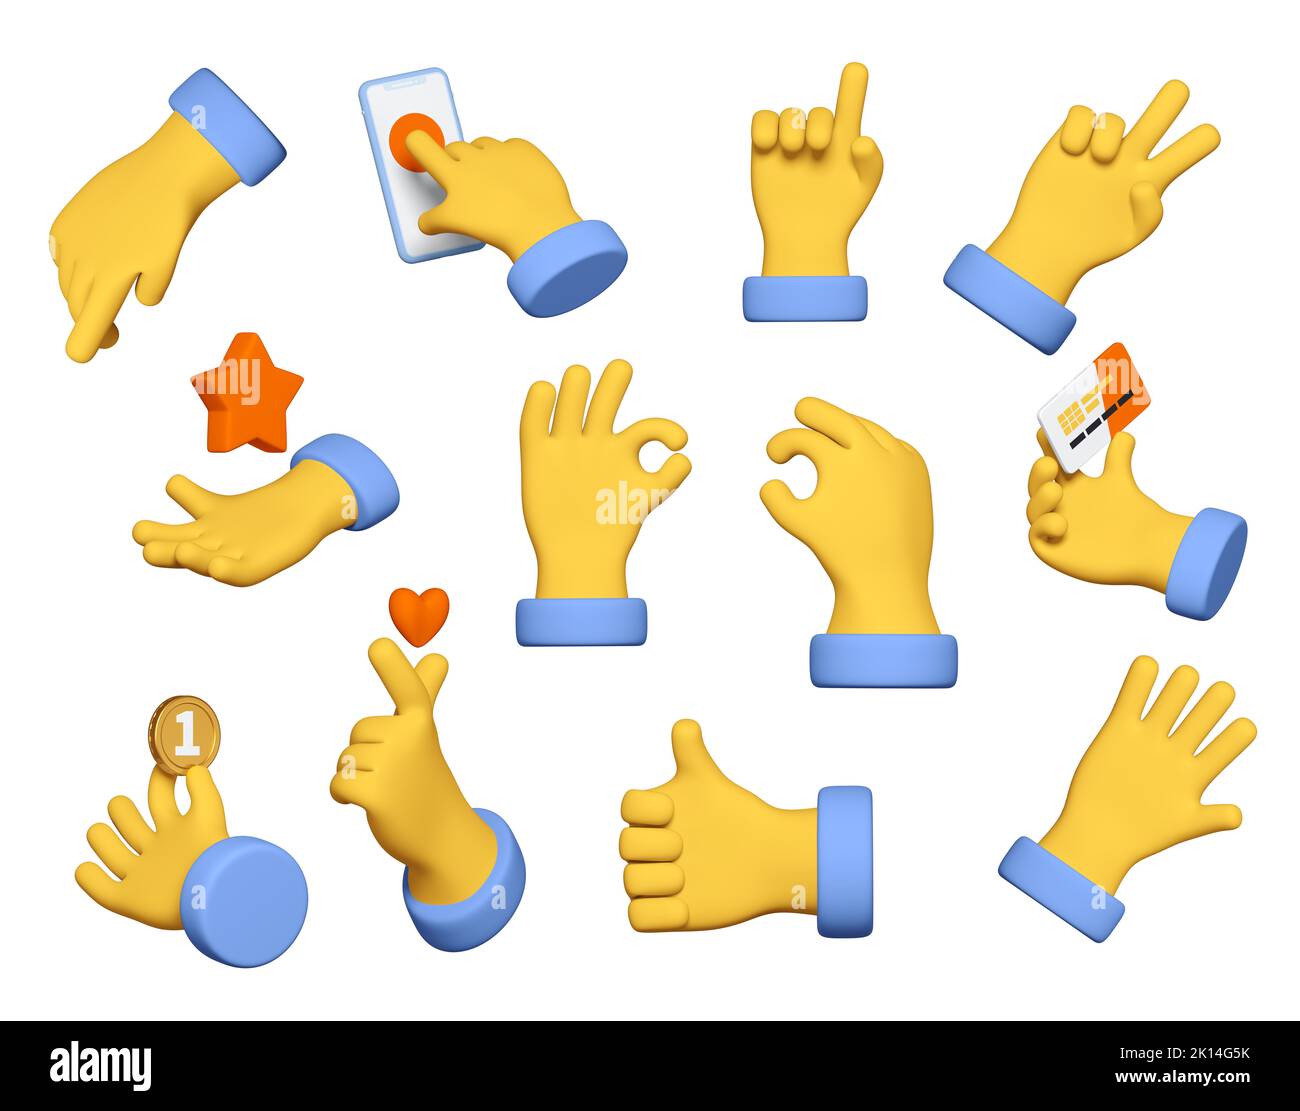 Sign language - modern realistic colorful 3d icon set Stock Photo